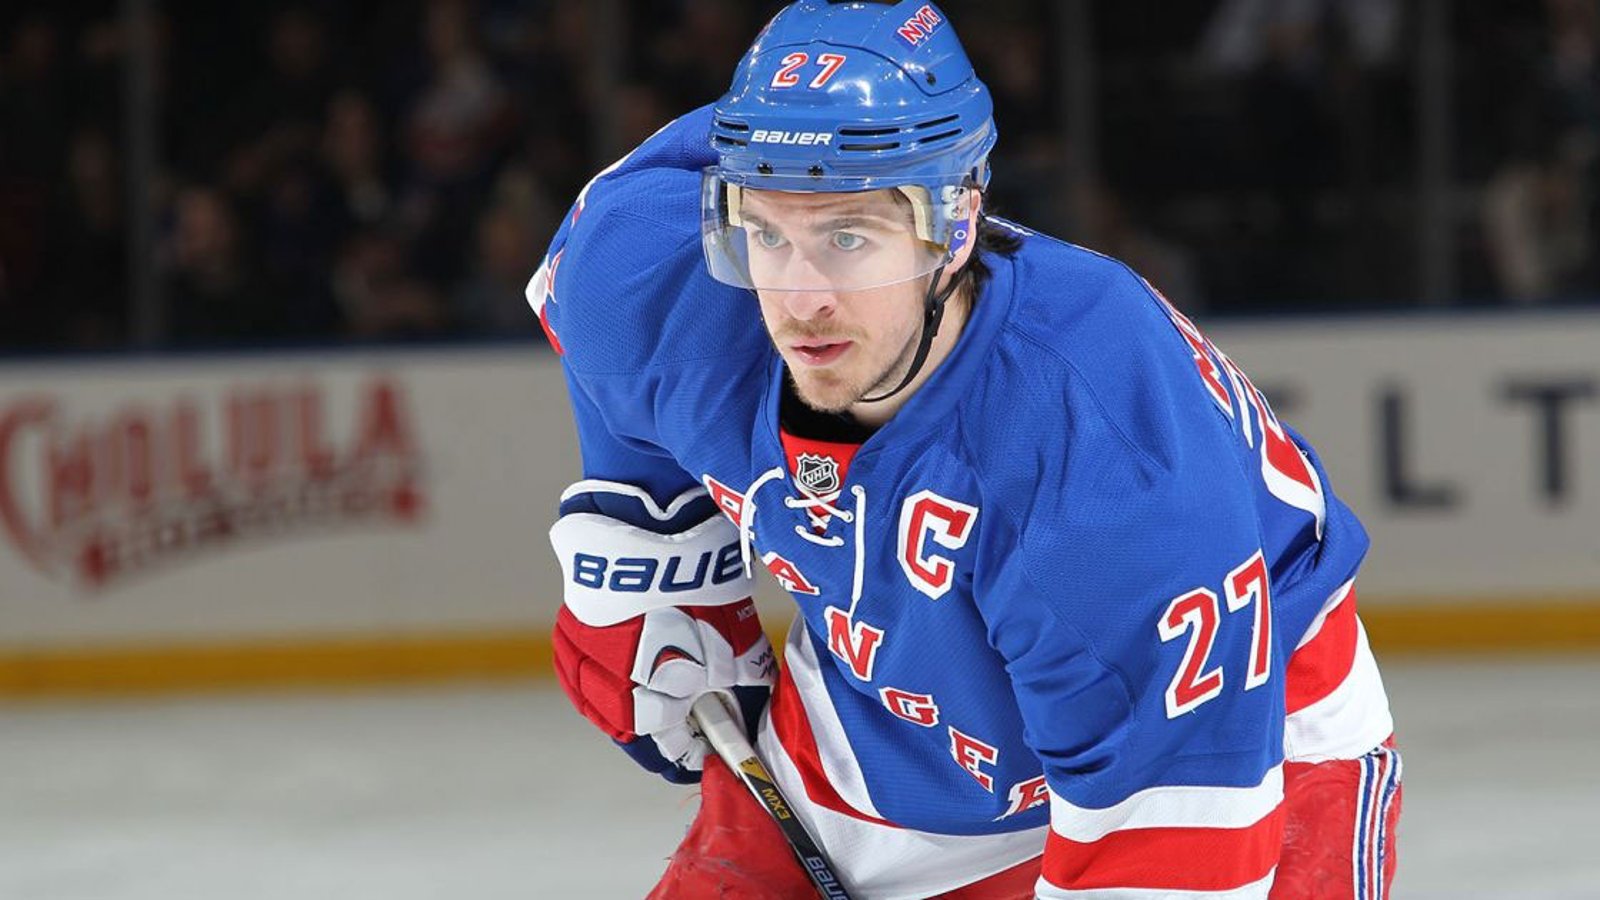 Breaking: McDonagh ruled out with abdominal injury 